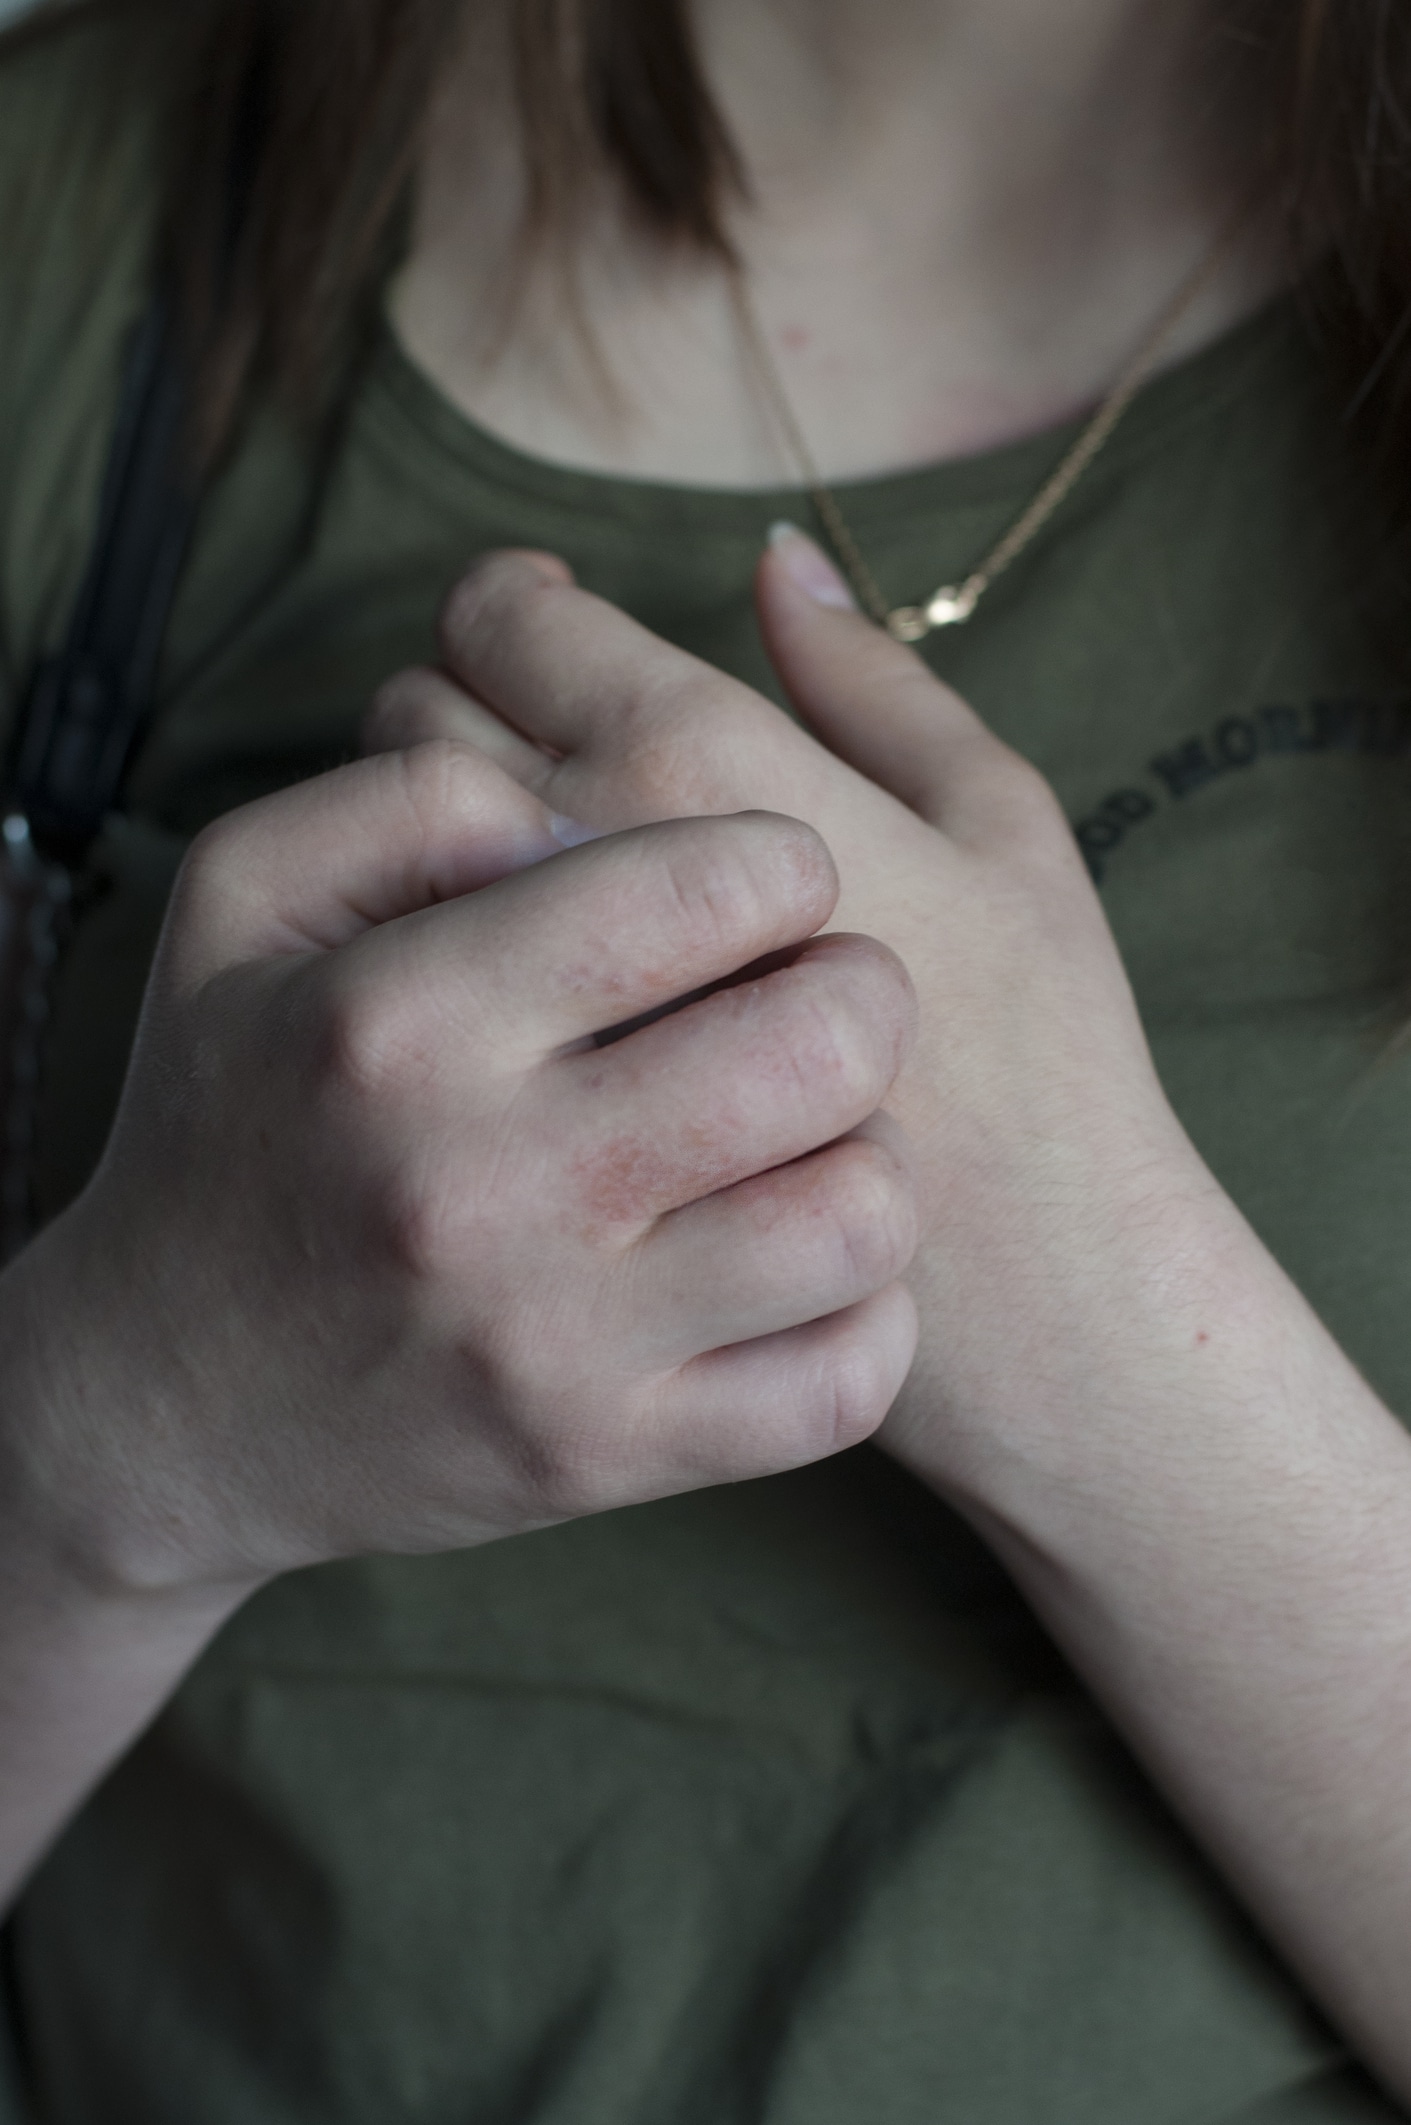 Girl scratching her hands that have a rash